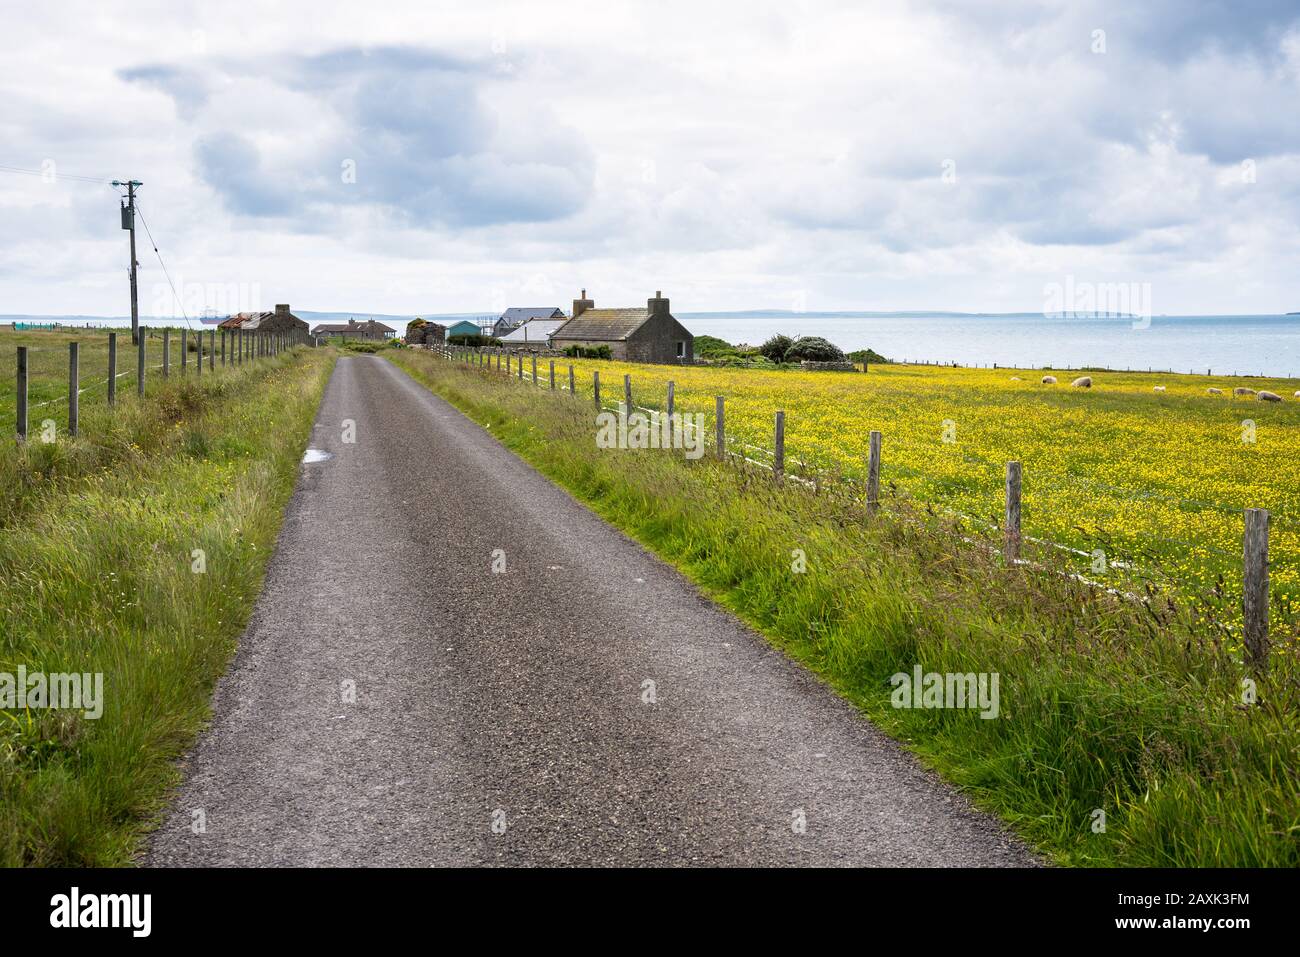 Empty back road between grassy fields, where sheep are grazing, to a small coastal village on a cloudy summer day. A tanker is visible in background. Stock Photo